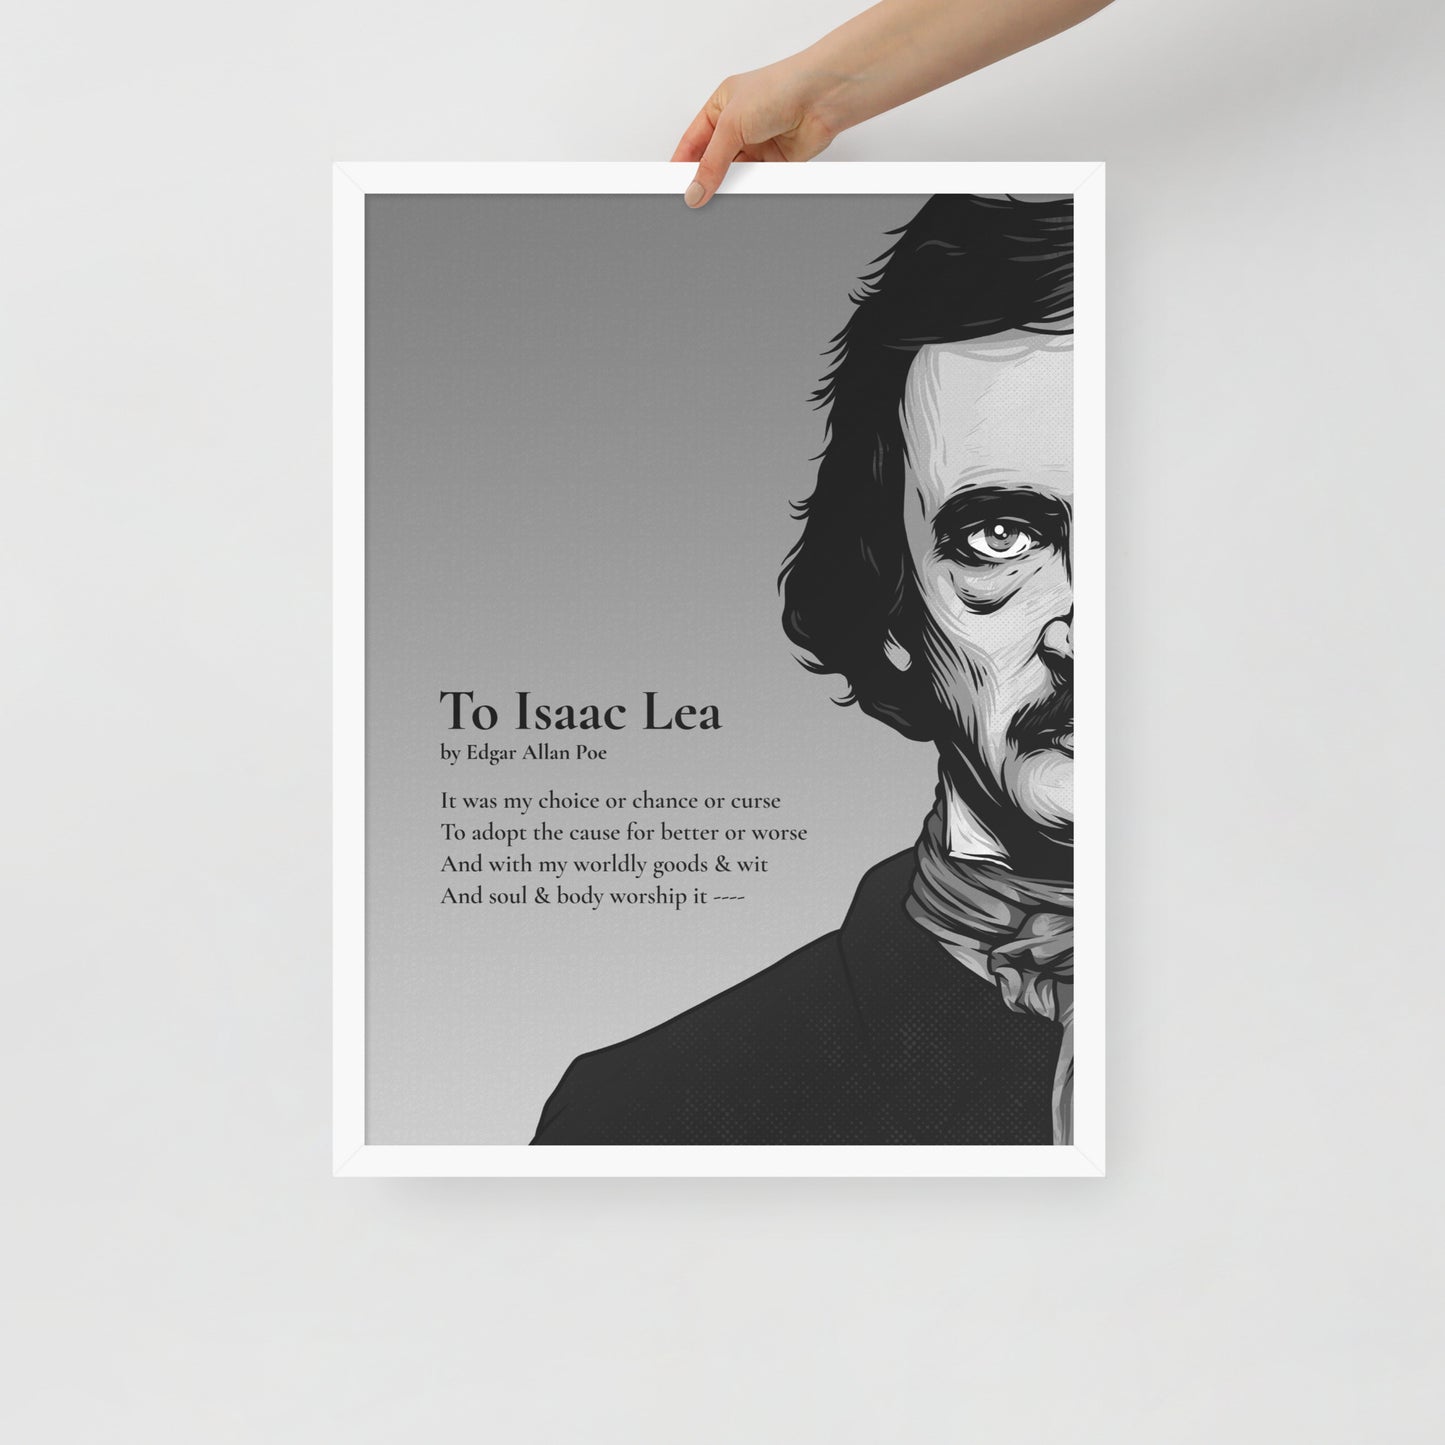 Edgar Allan Poe's 'To Isaac Lea' Framed Matted Poster - 18 x 24 White Frame